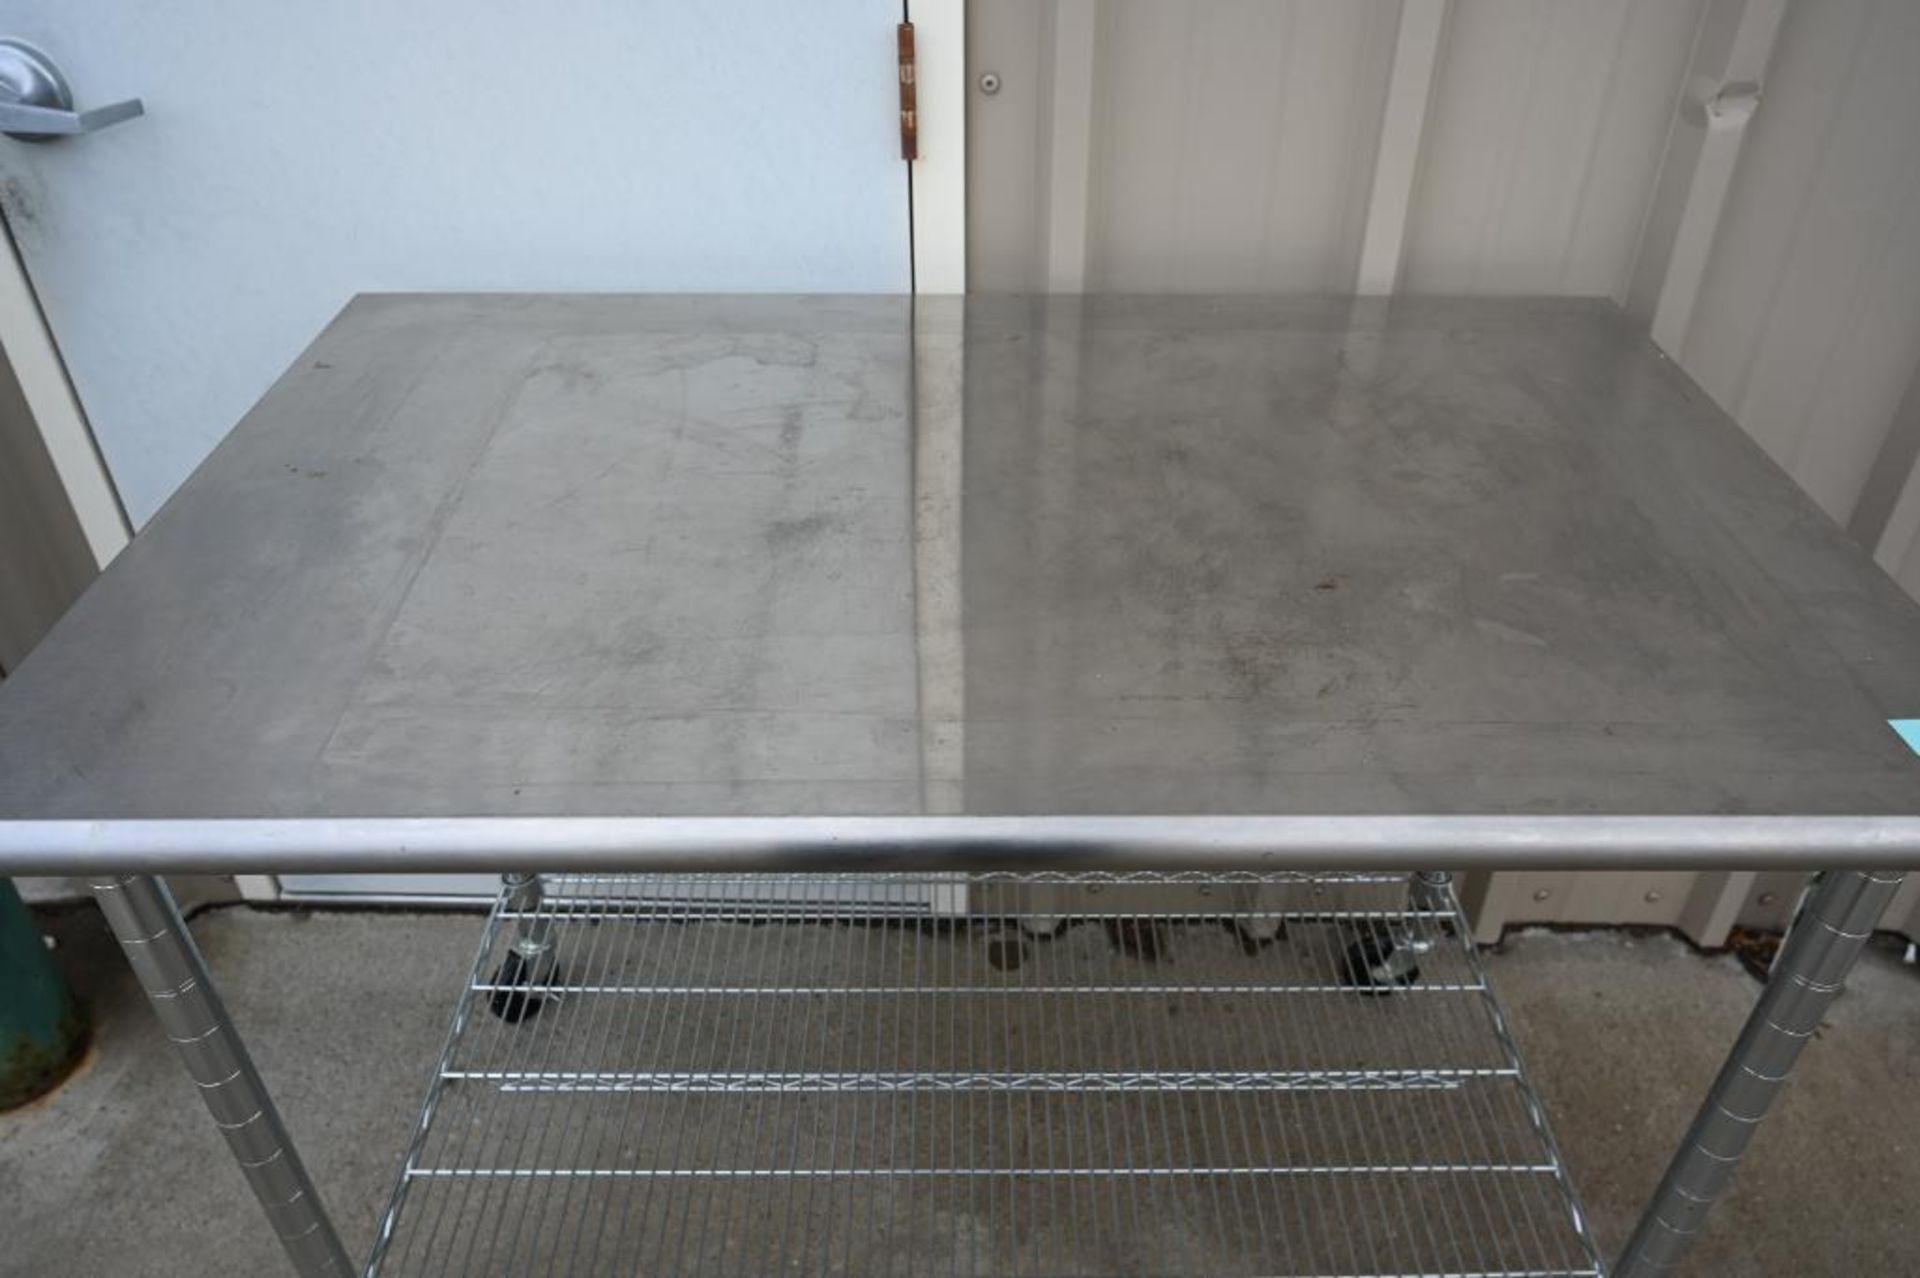 NSF 48" Stainless Steel Work Table with Casters - Image 6 of 10